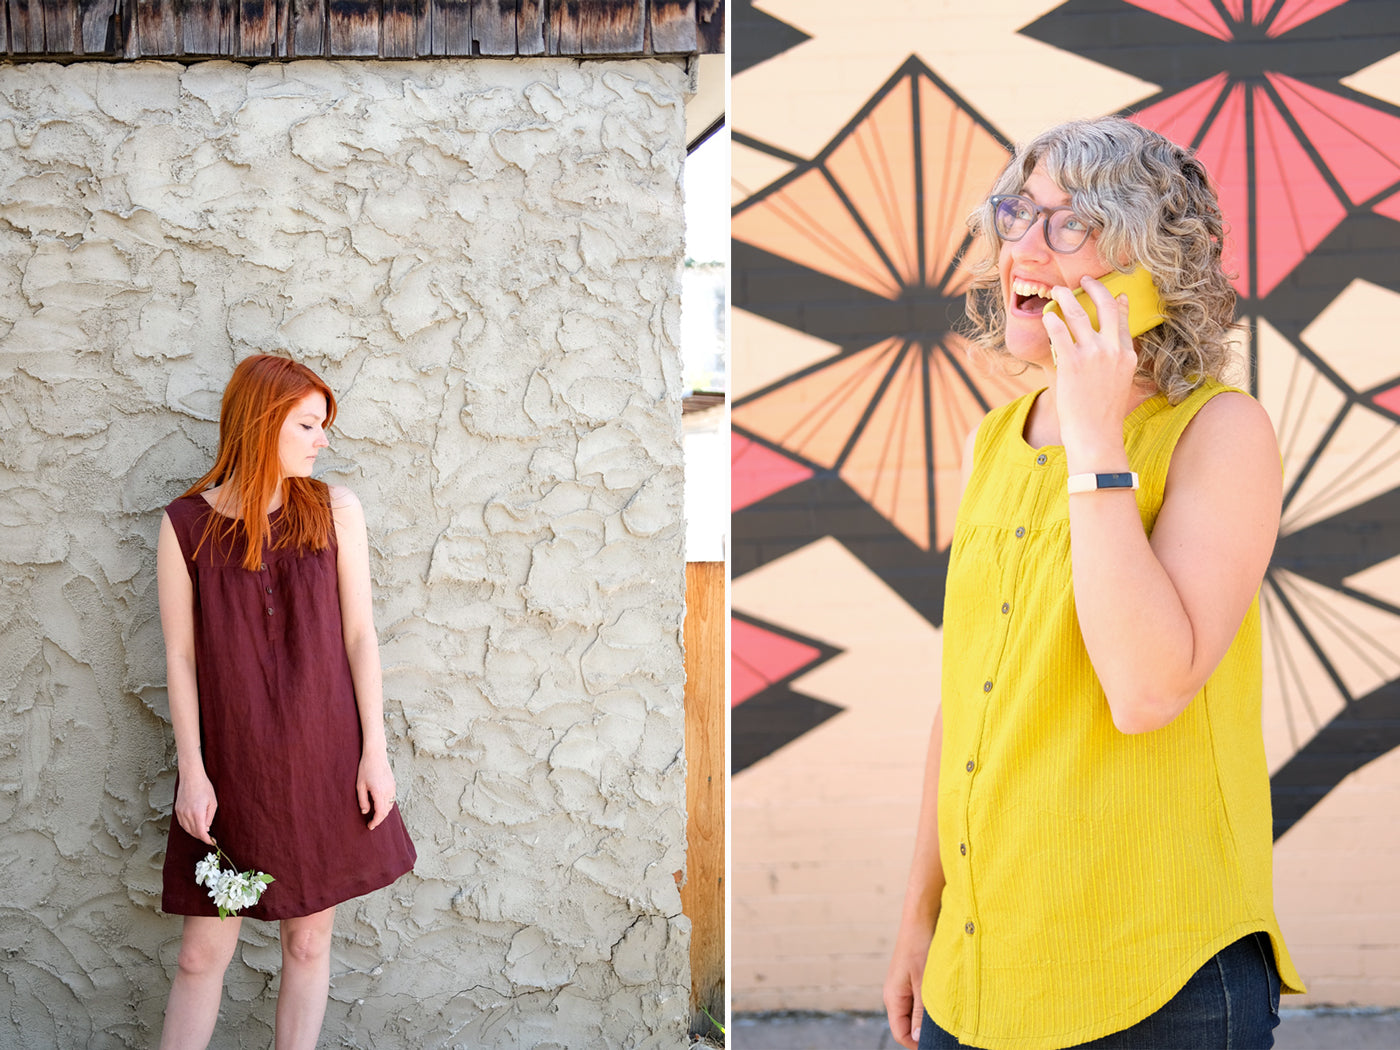 Two Sleeveless Bromes- A Alison Glass Mariner Cloth shirt and a Burgundy Linen dress